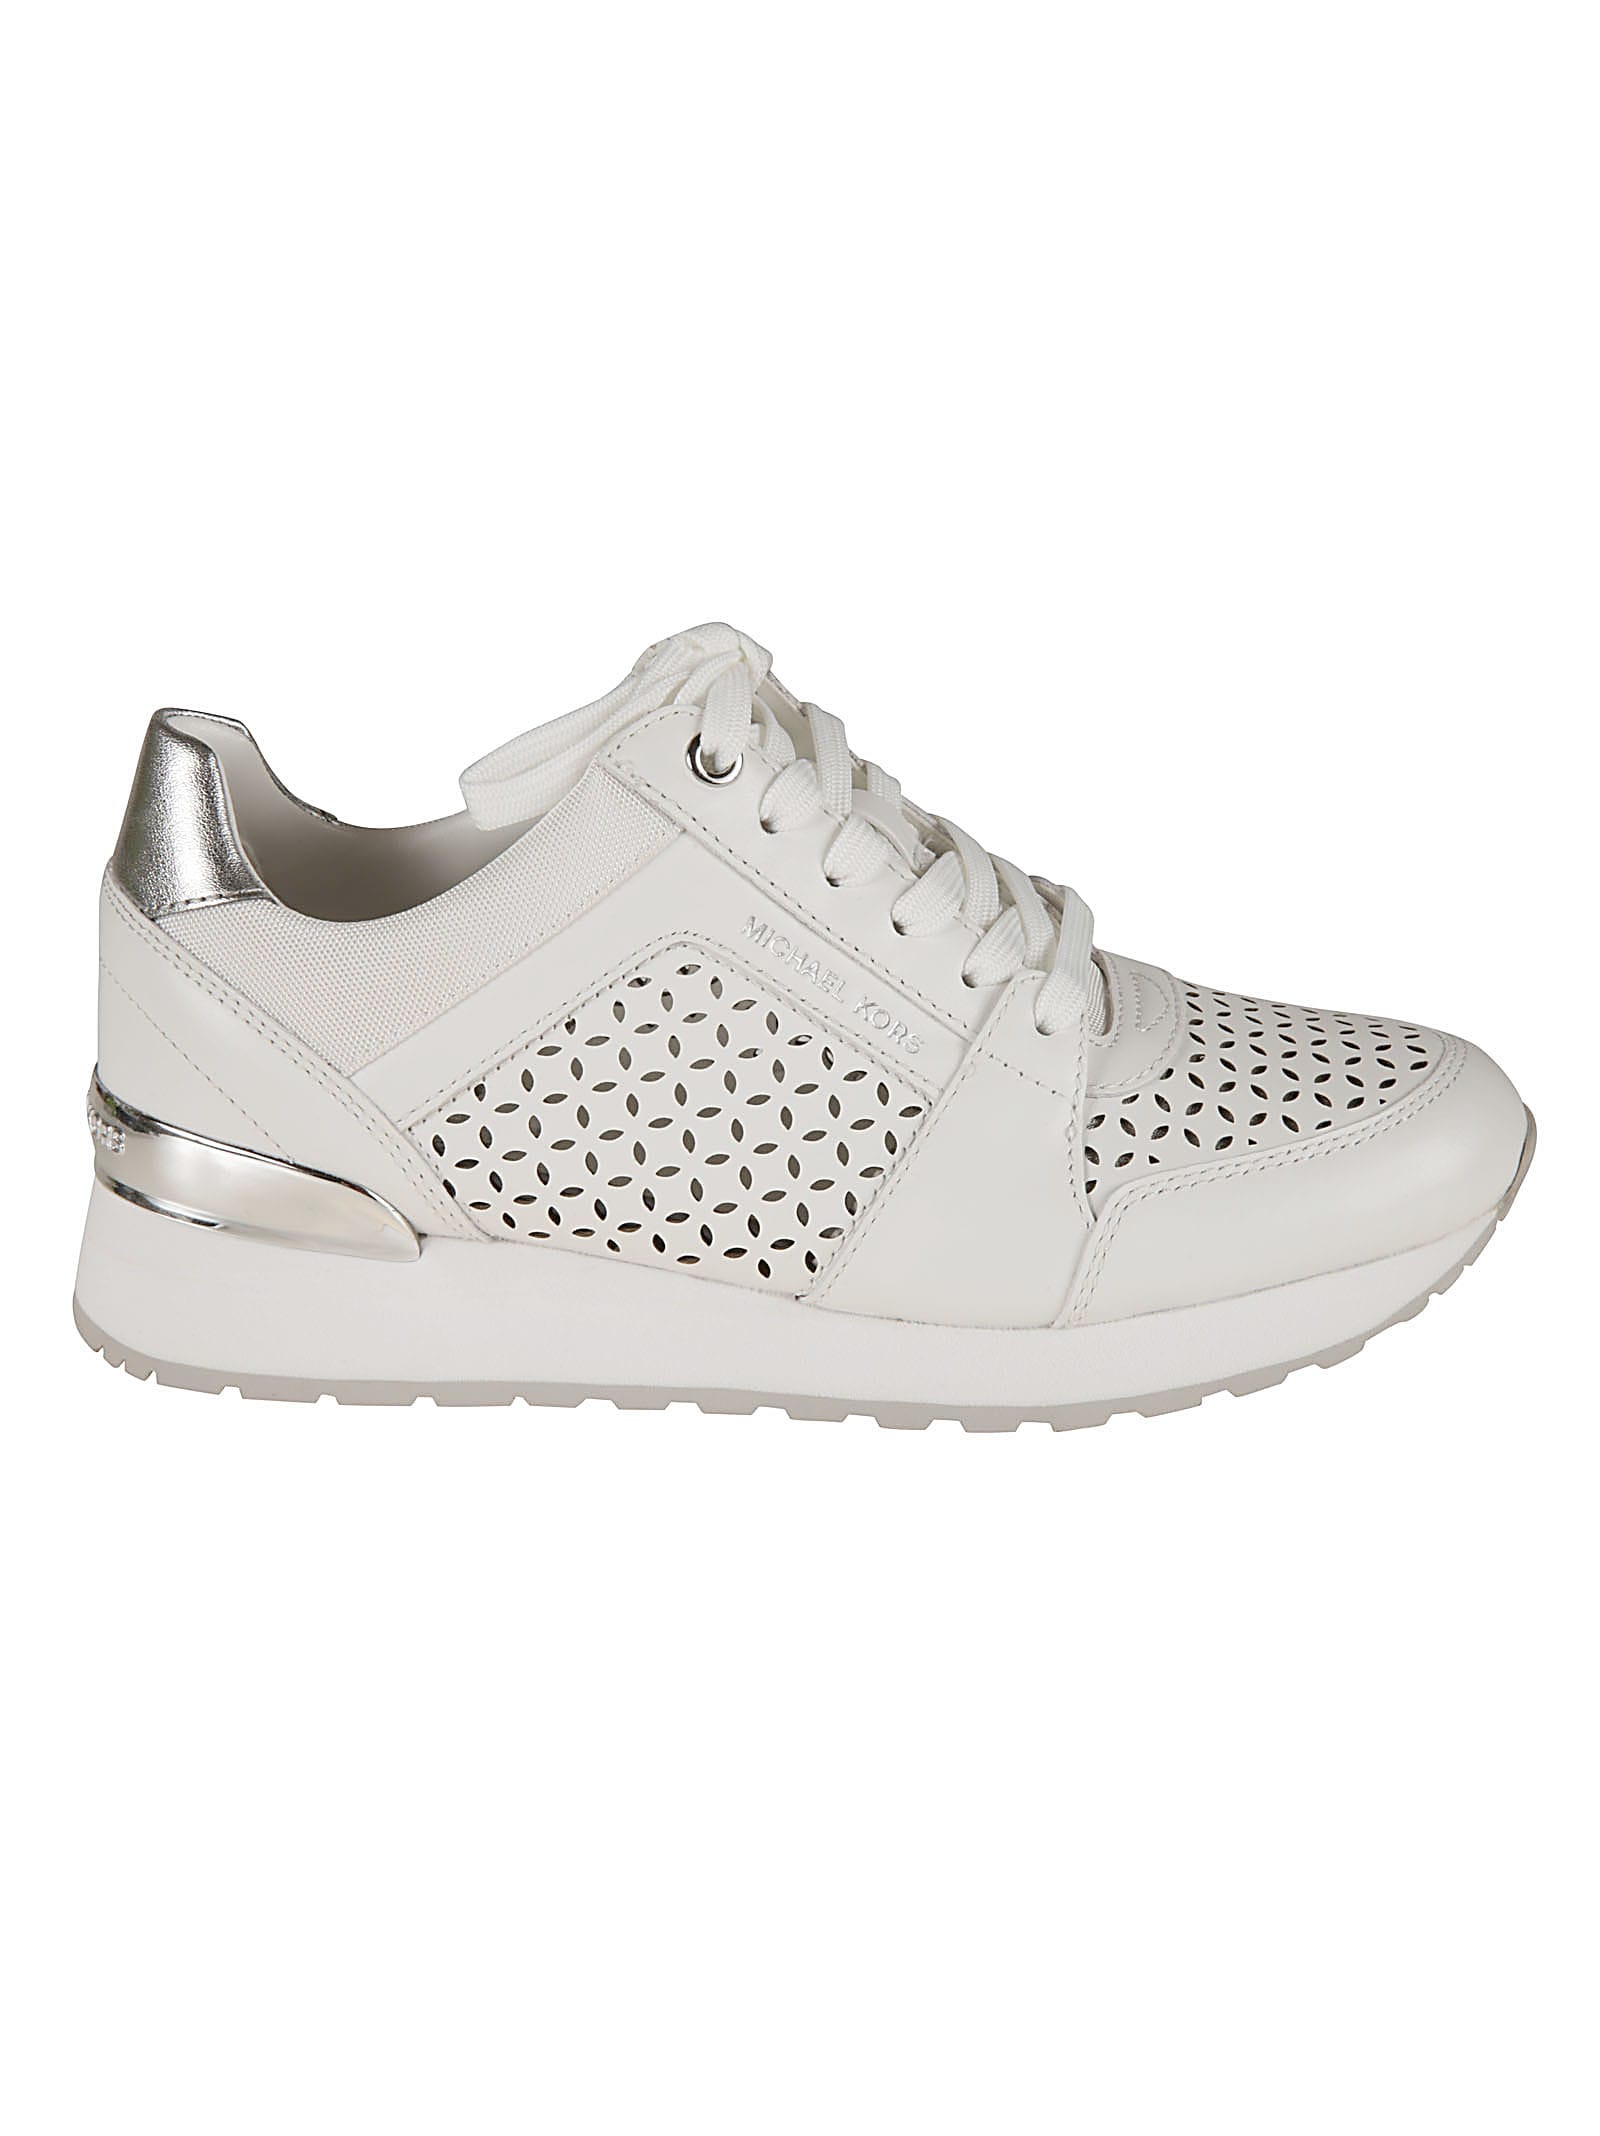 Buy Michael Kors Billie Sneakers online, shop Michael Kors shoes with free shipping